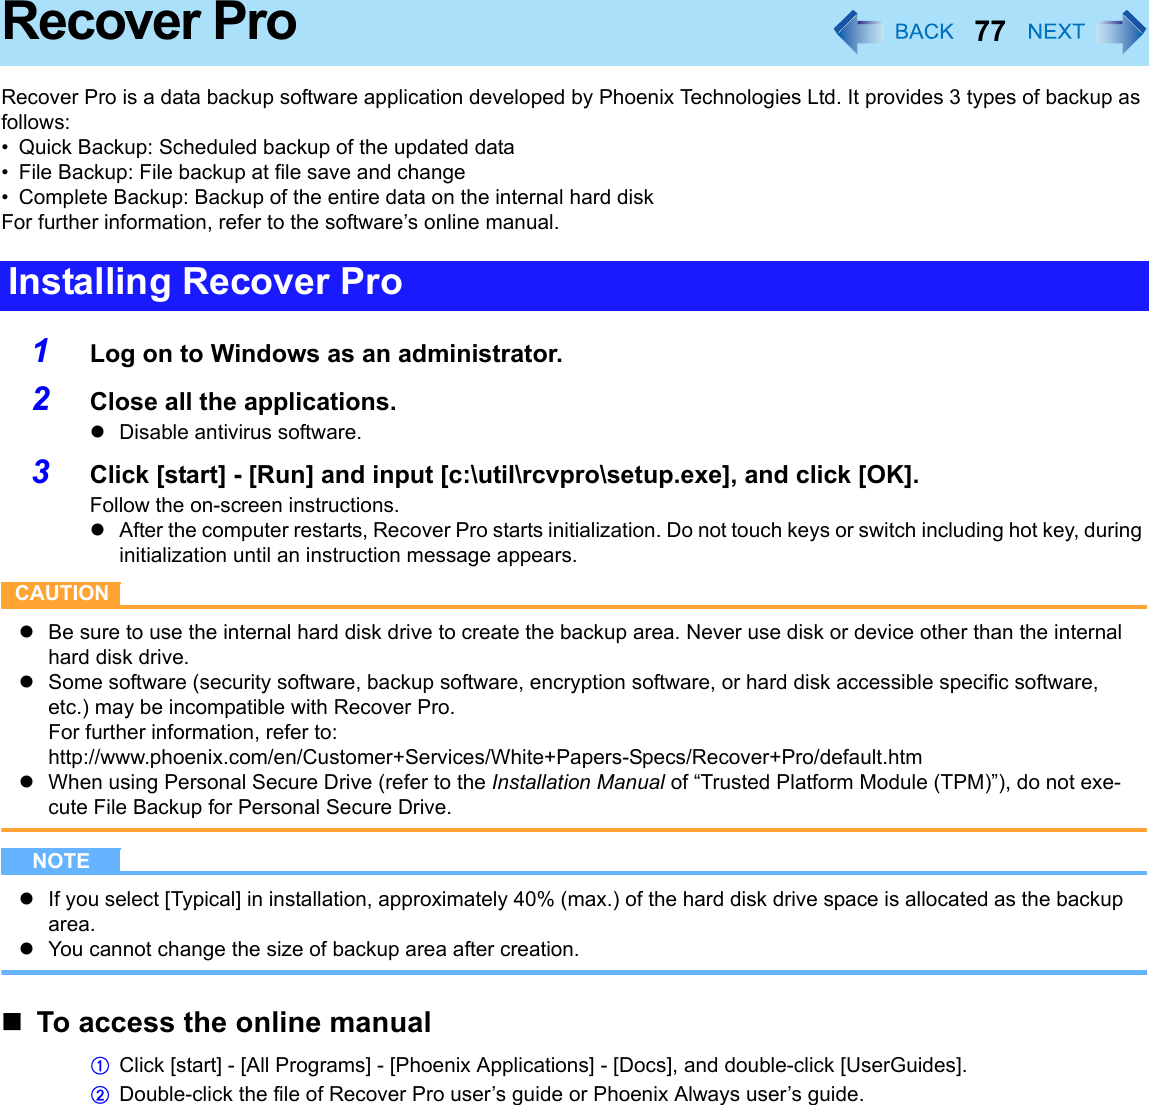 77Recover ProRecover Pro is a data backup software application developed by Phoenix Technologies Ltd. It provides 3 types of backup as follows:• Quick Backup: Scheduled backup of the updated data• File Backup: File backup at file save and change• Complete Backup: Backup of the entire data on the internal hard diskFor further information, refer to the software’s online manual.1Log on to Windows as an administrator.2Close all the applications.zDisable antivirus software.3Click [start] - [Run] and input [c:\util\rcvpro\setup.exe], and click [OK].Follow the on-screen instructions.zAfter the computer restarts, Recover Pro starts initialization. Do not touch keys or switch including hot key, during initialization until an instruction message appears.CAUTIONzBe sure to use the internal hard disk drive to create the backup area. Never use disk or device other than the internal hard disk drive.zSome software (security software, backup software, encryption software, or hard disk accessible specific software, etc.) may be incompatible with Recover Pro.For further information, refer to:http://www.phoenix.com/en/Customer+Services/White+Papers-Specs/Recover+Pro/default.htmzWhen using Personal Secure Drive (refer to the Installation Manual of “Trusted Platform Module (TPM)”), do not exe-cute File Backup for Personal Secure Drive.NOTEzIf you select [Typical] in installation, approximately 40% (max.) of the hard disk drive space is allocated as the backup area.zYou cannot change the size of backup area after creation.To access the online manualAClick [start] - [All Programs] - [Phoenix Applications] - [Docs], and double-click [UserGuides].BDouble-click the file of Recover Pro user’s guide or Phoenix Always user’s guide.Installing Recover Pro